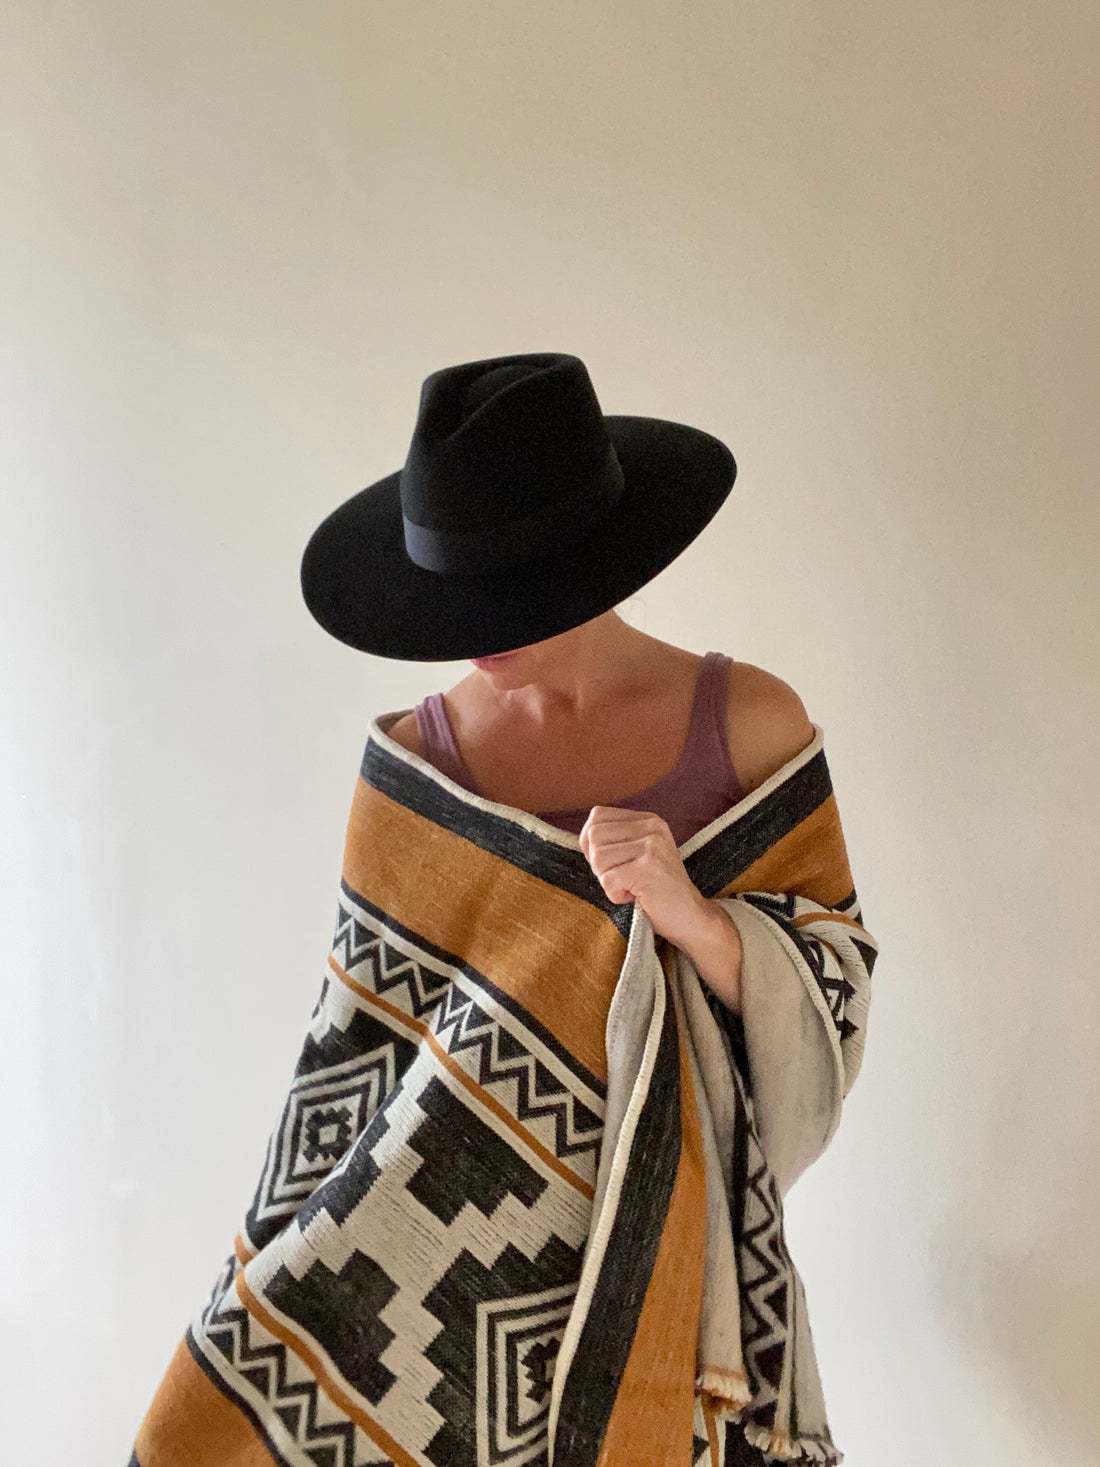 Sustainable Fashion Accessories by The Hip Hat will help you cheer up! The Hip Hat